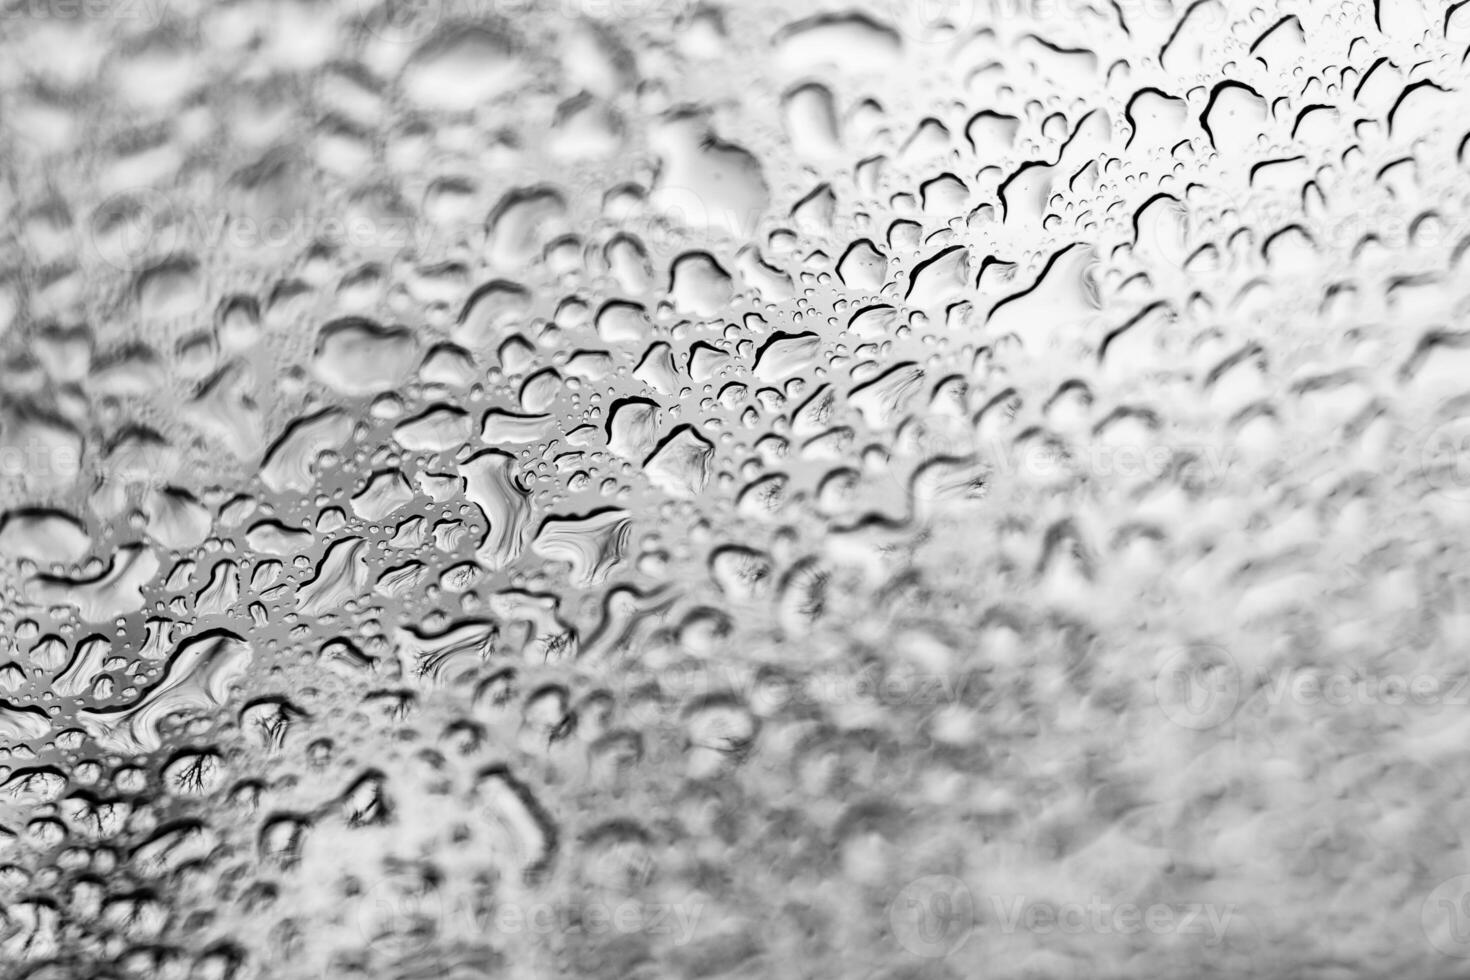 White clear rain drops on window glasses surface with grey background. Natural pattern of drops isolated on cloudy background. Close-up photo